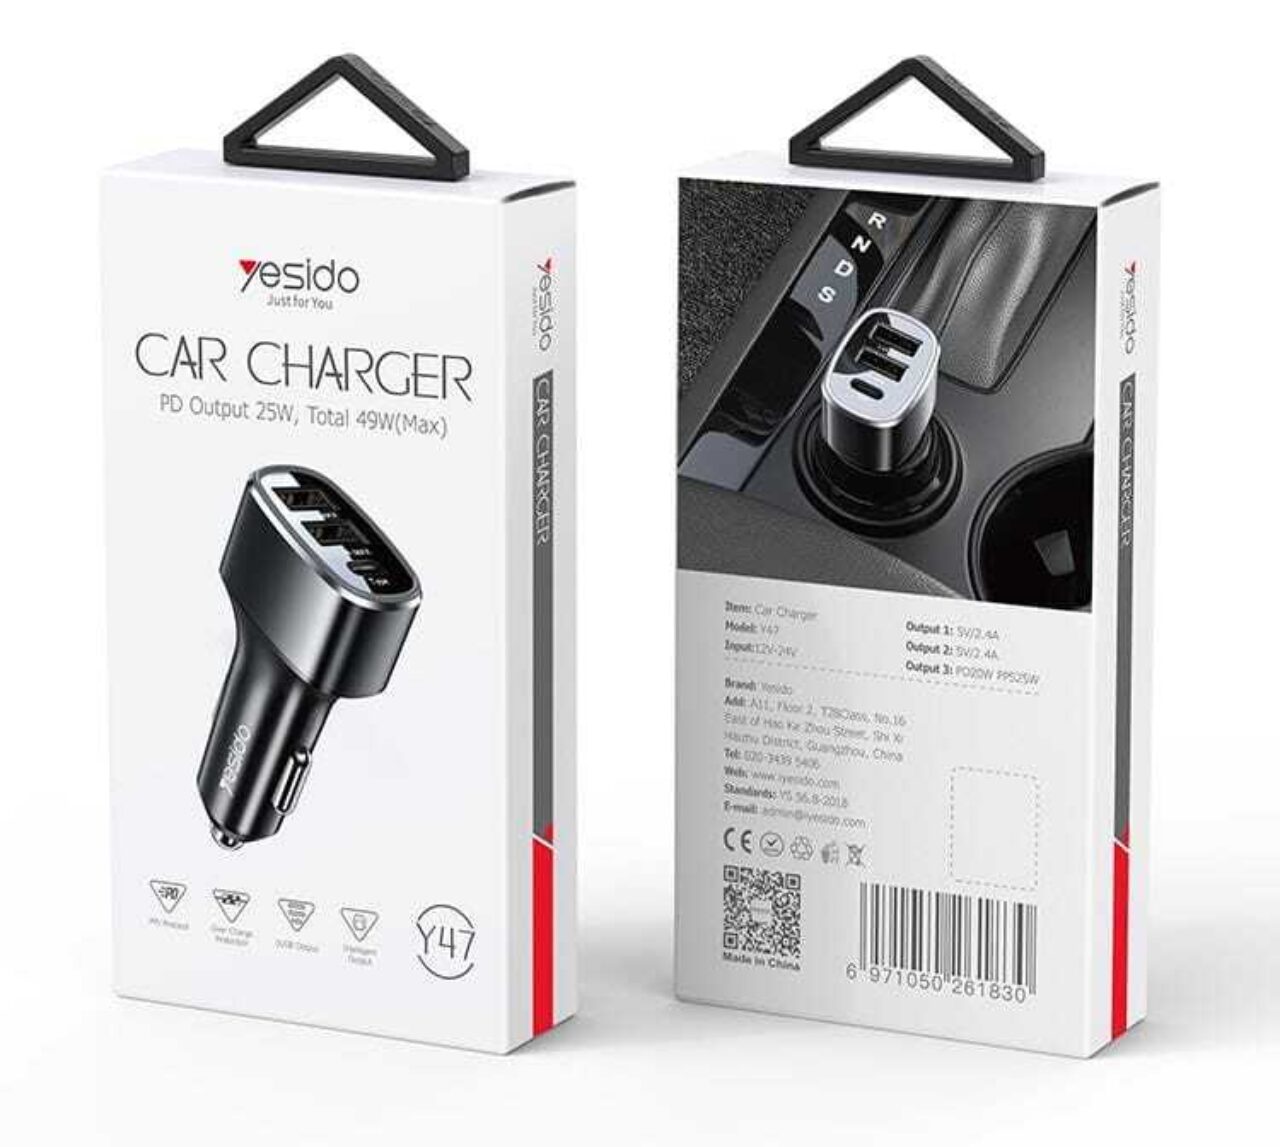 Yesido Car Charger PD output 25w49w max Y47